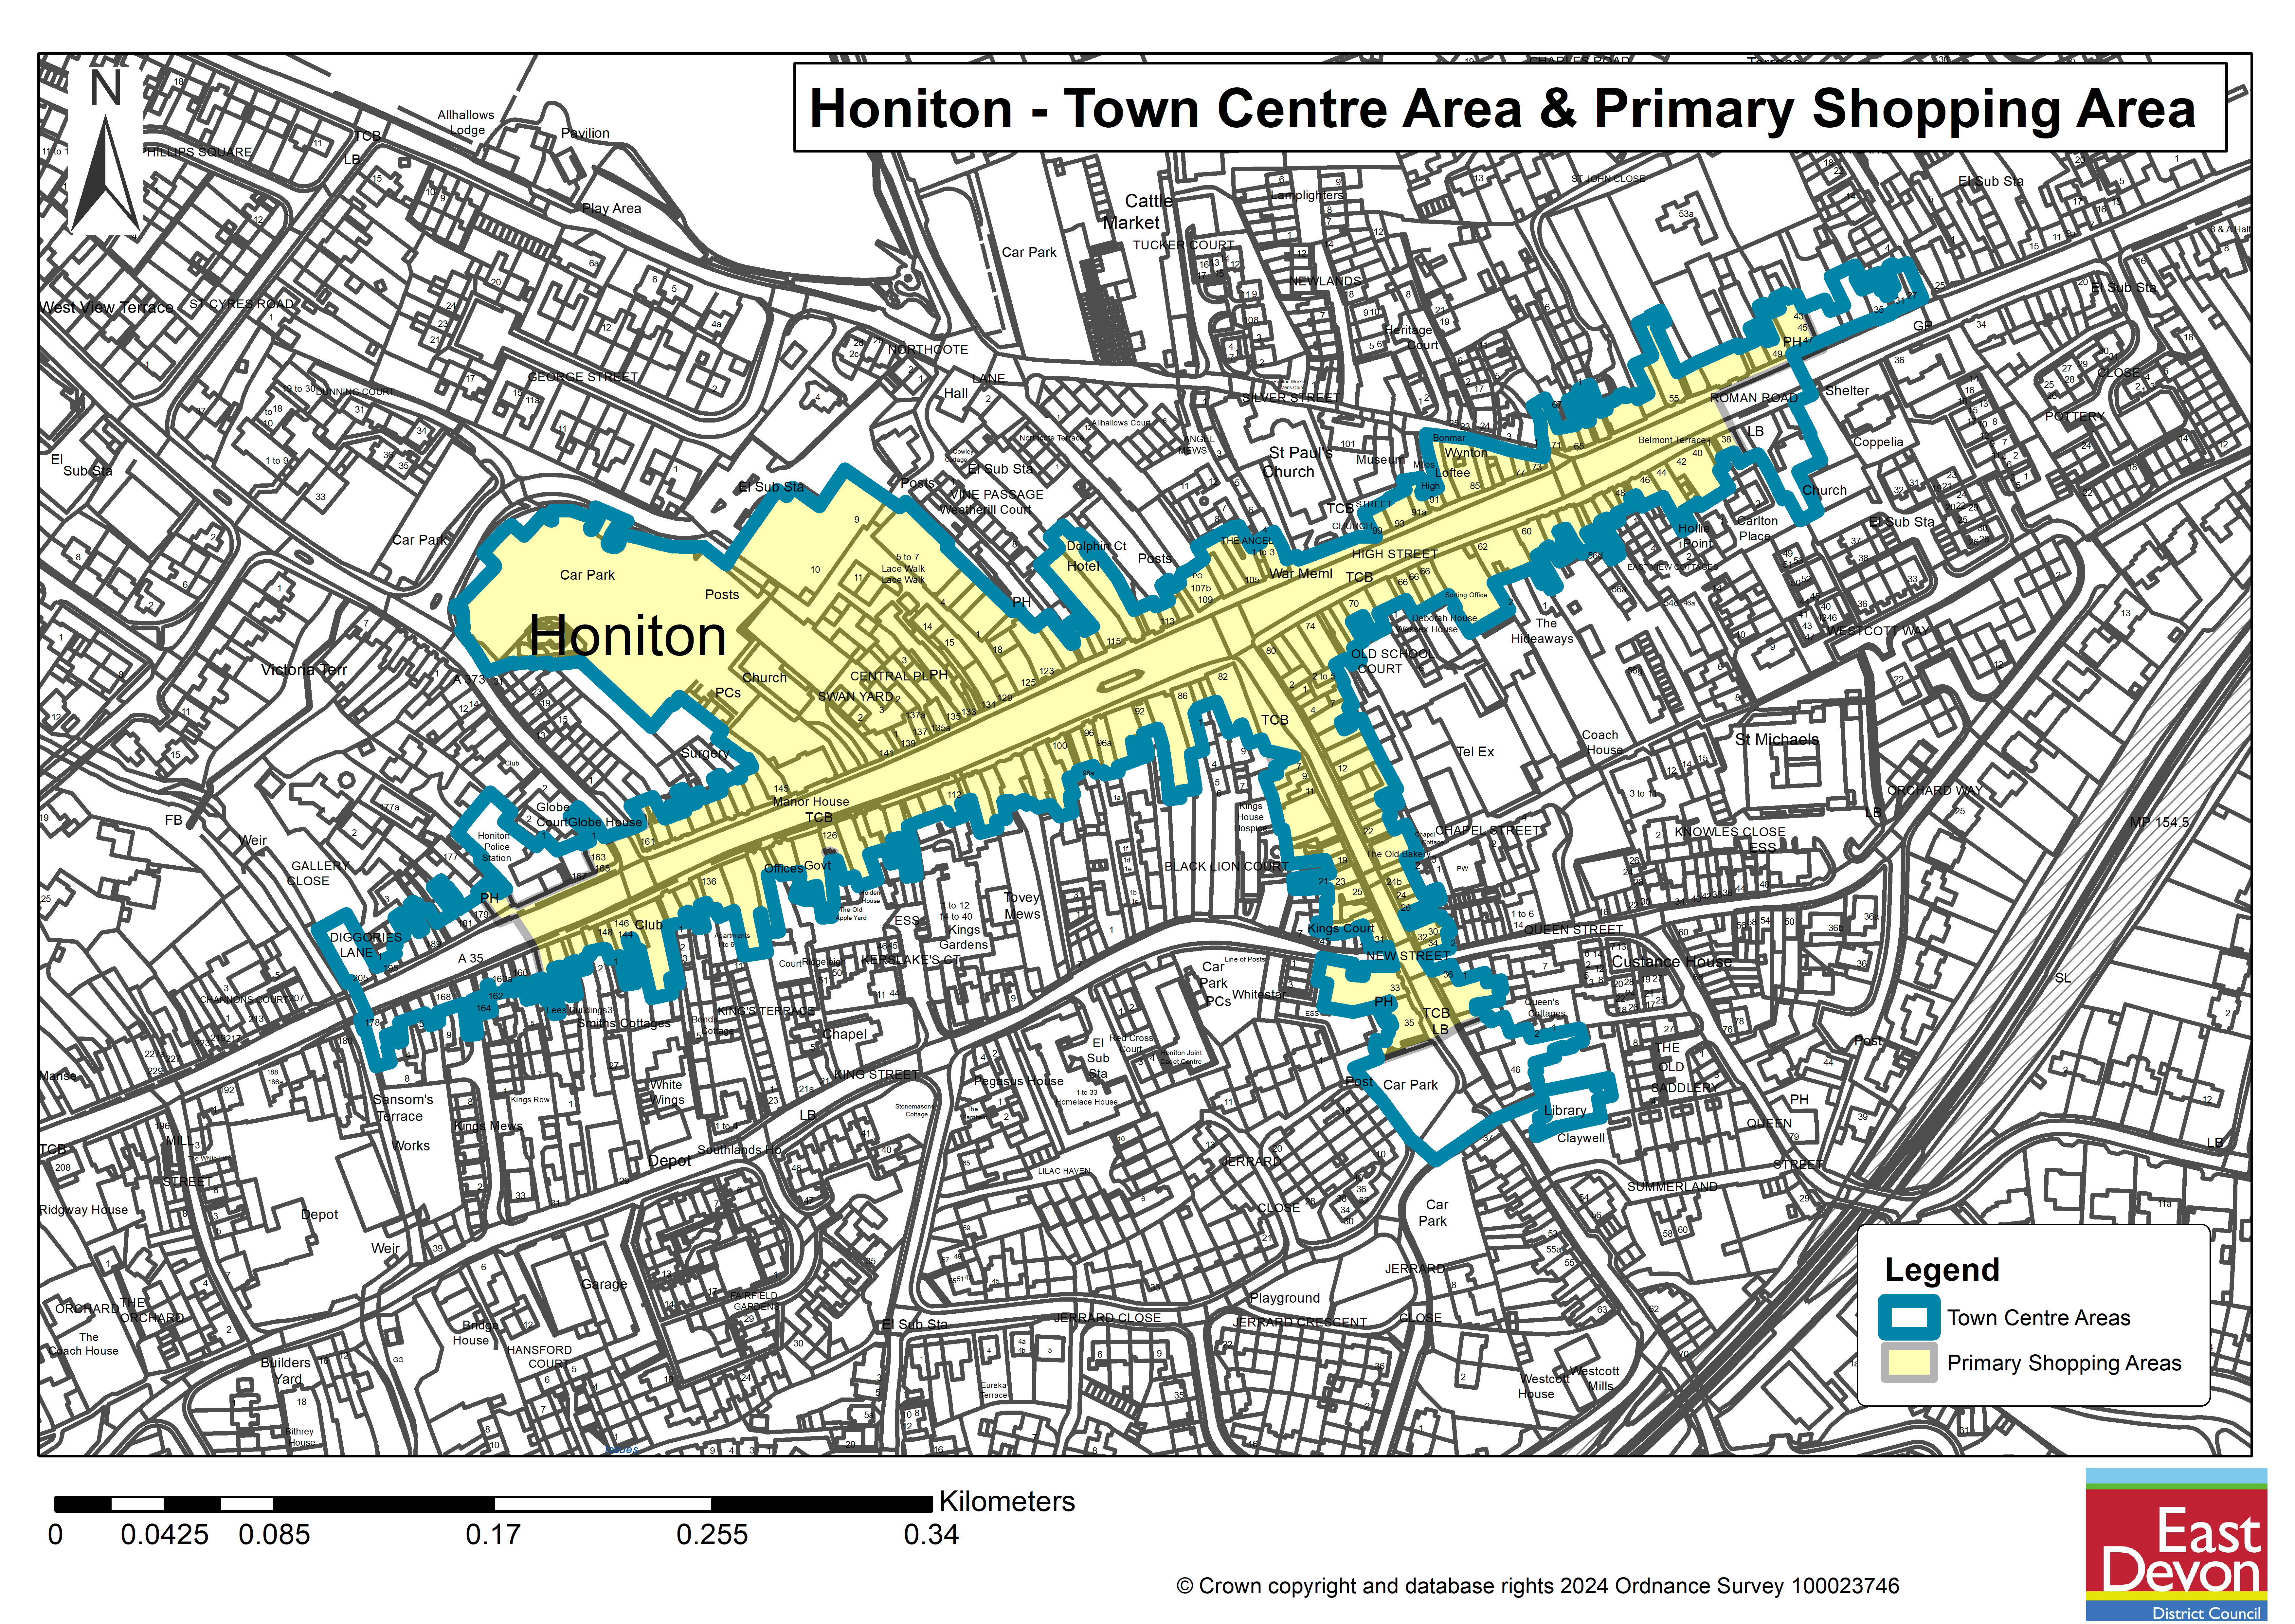 Map of the proposed Honiton Town Centre Area and Primary Shopping Area